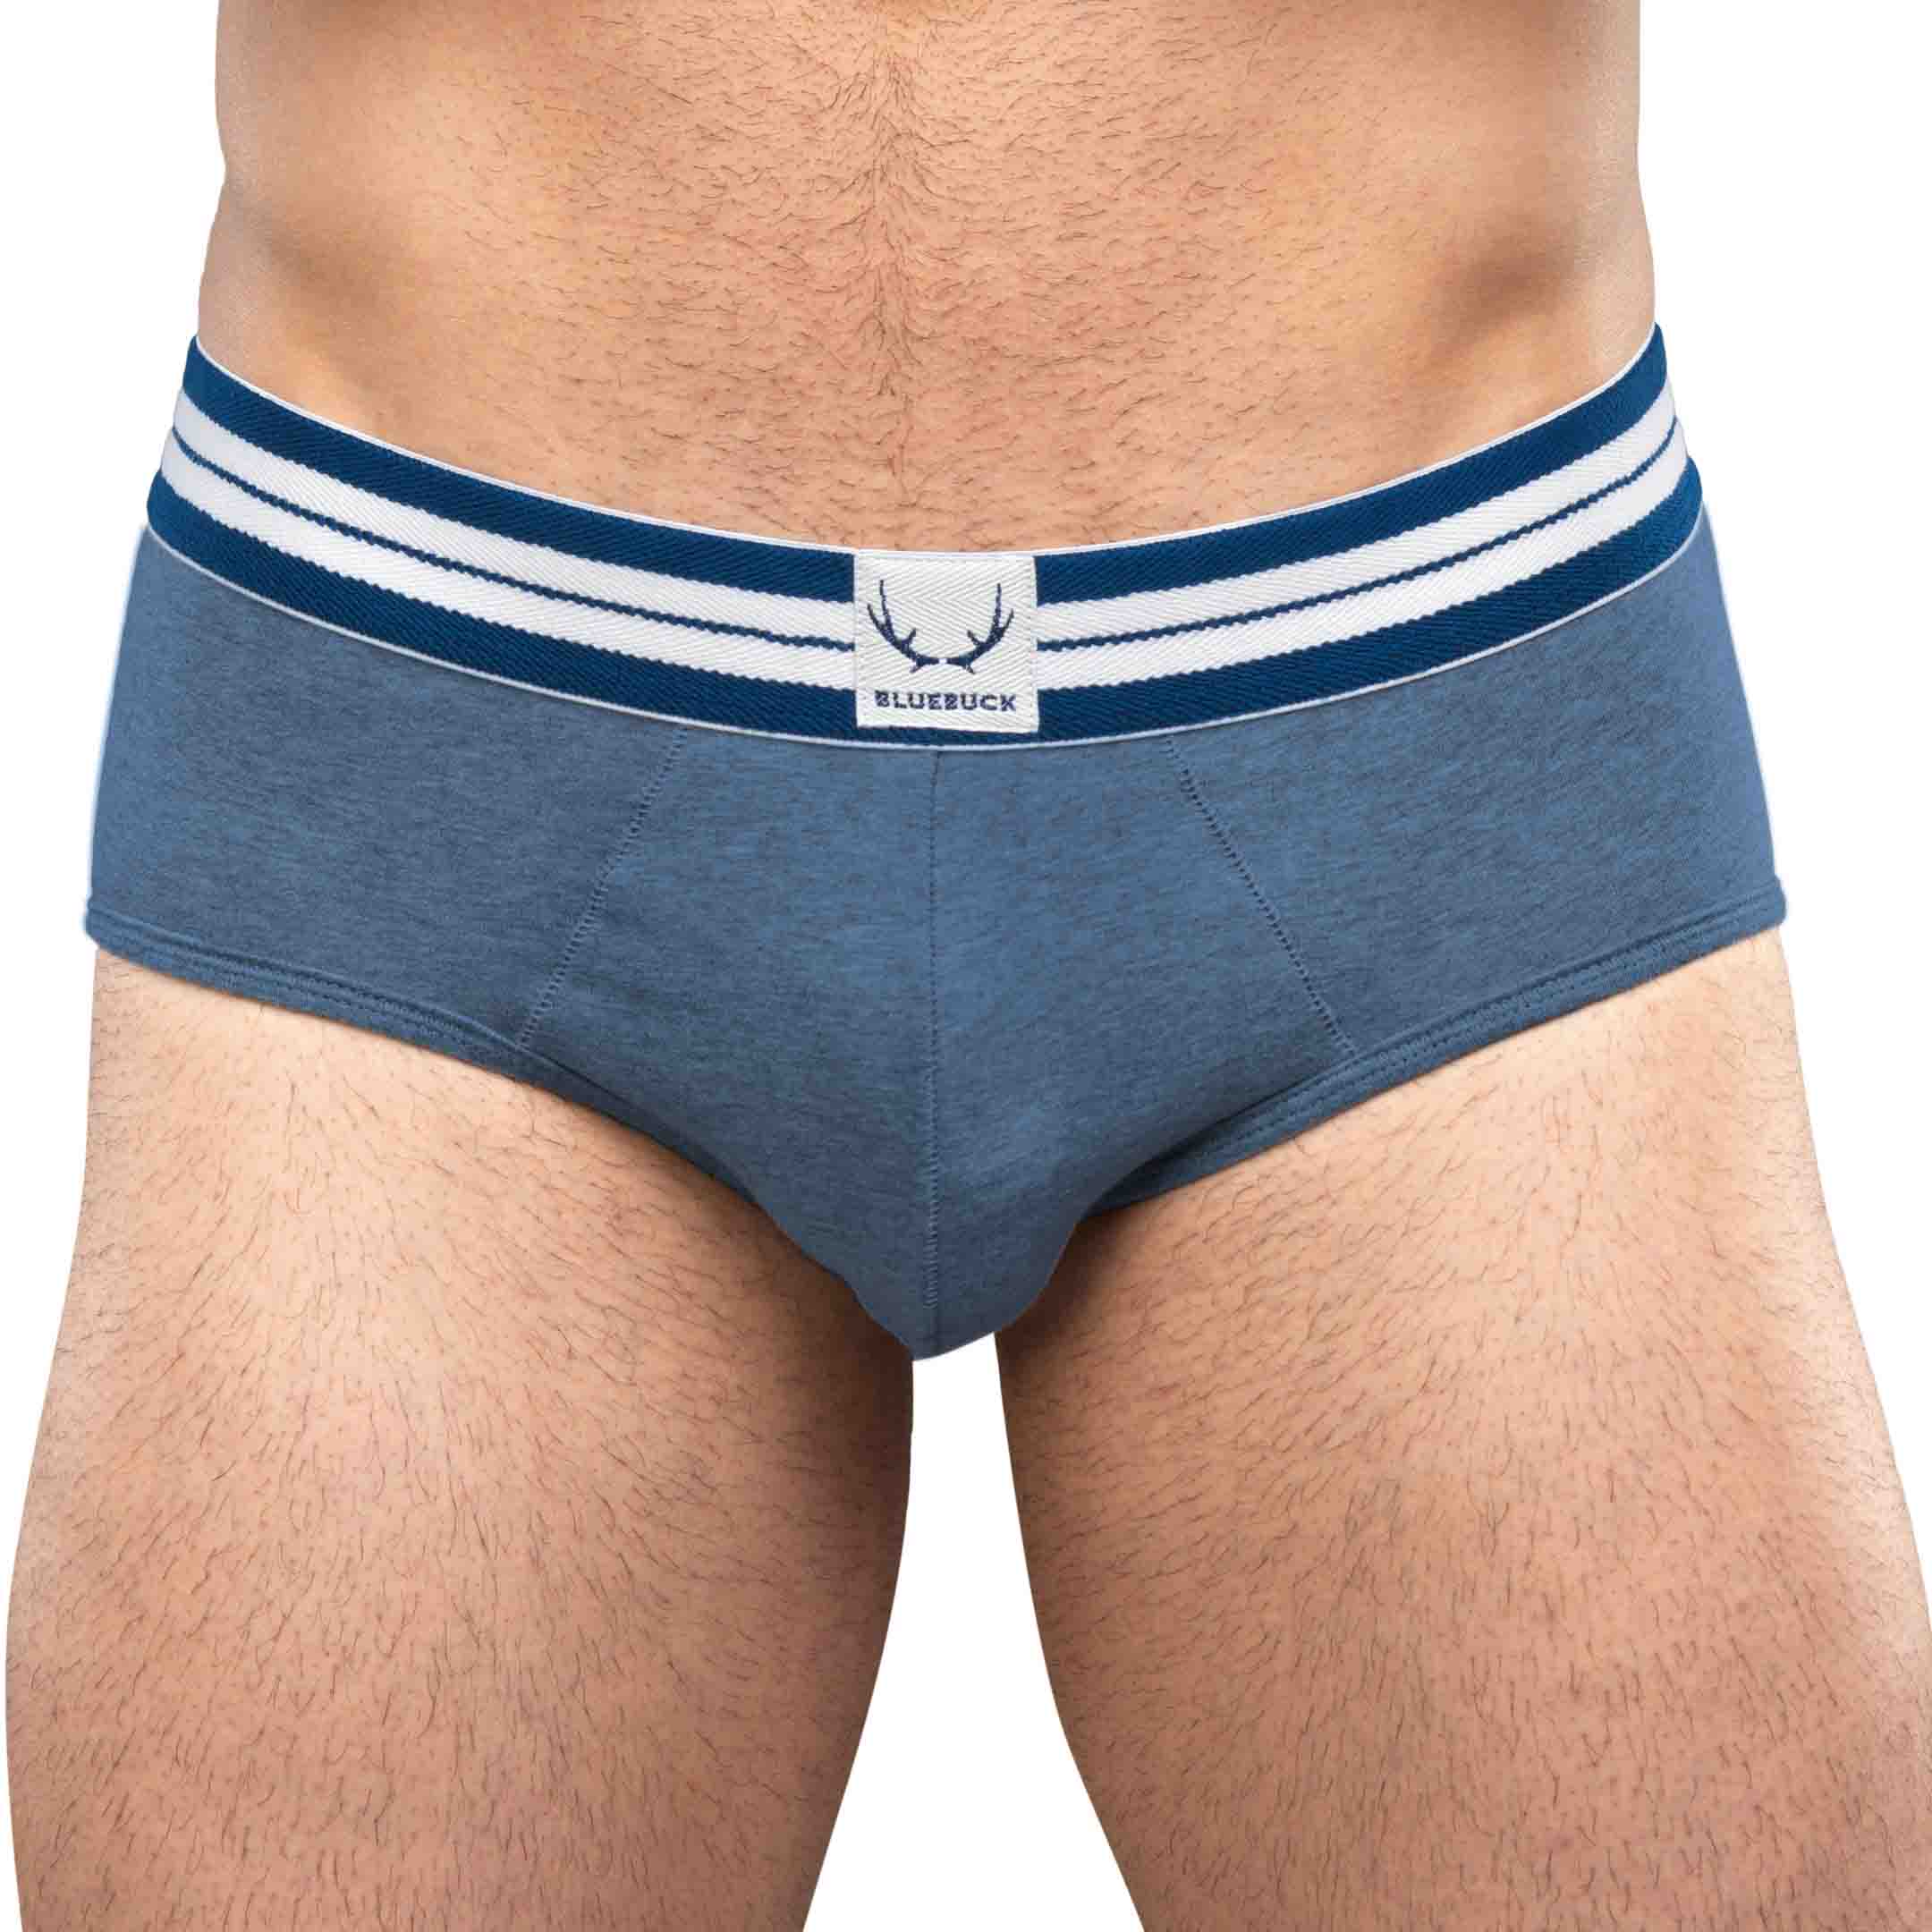 Moon blue underpants made of organic cotton from Bluebuck